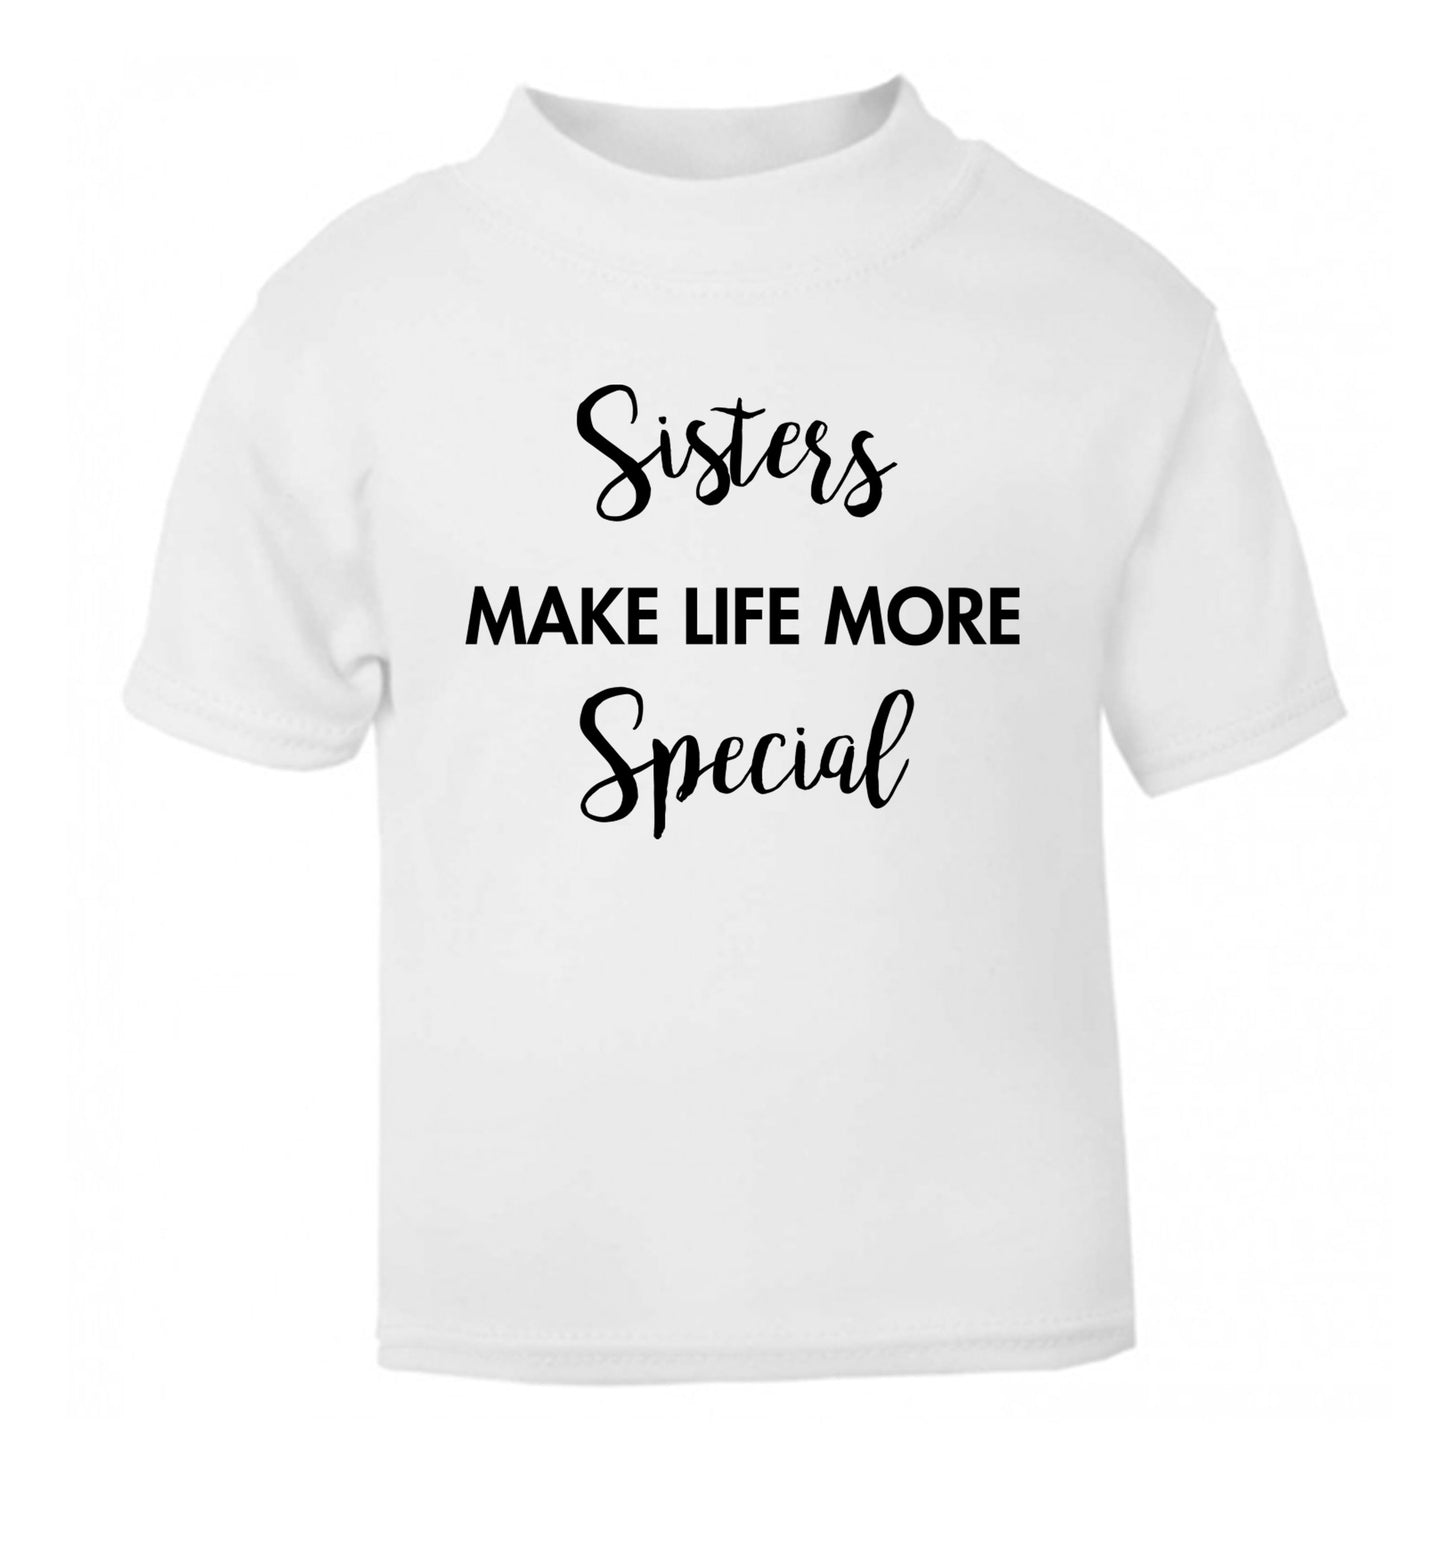 Sisters make life more special white Baby Toddler Tshirt 2 Years